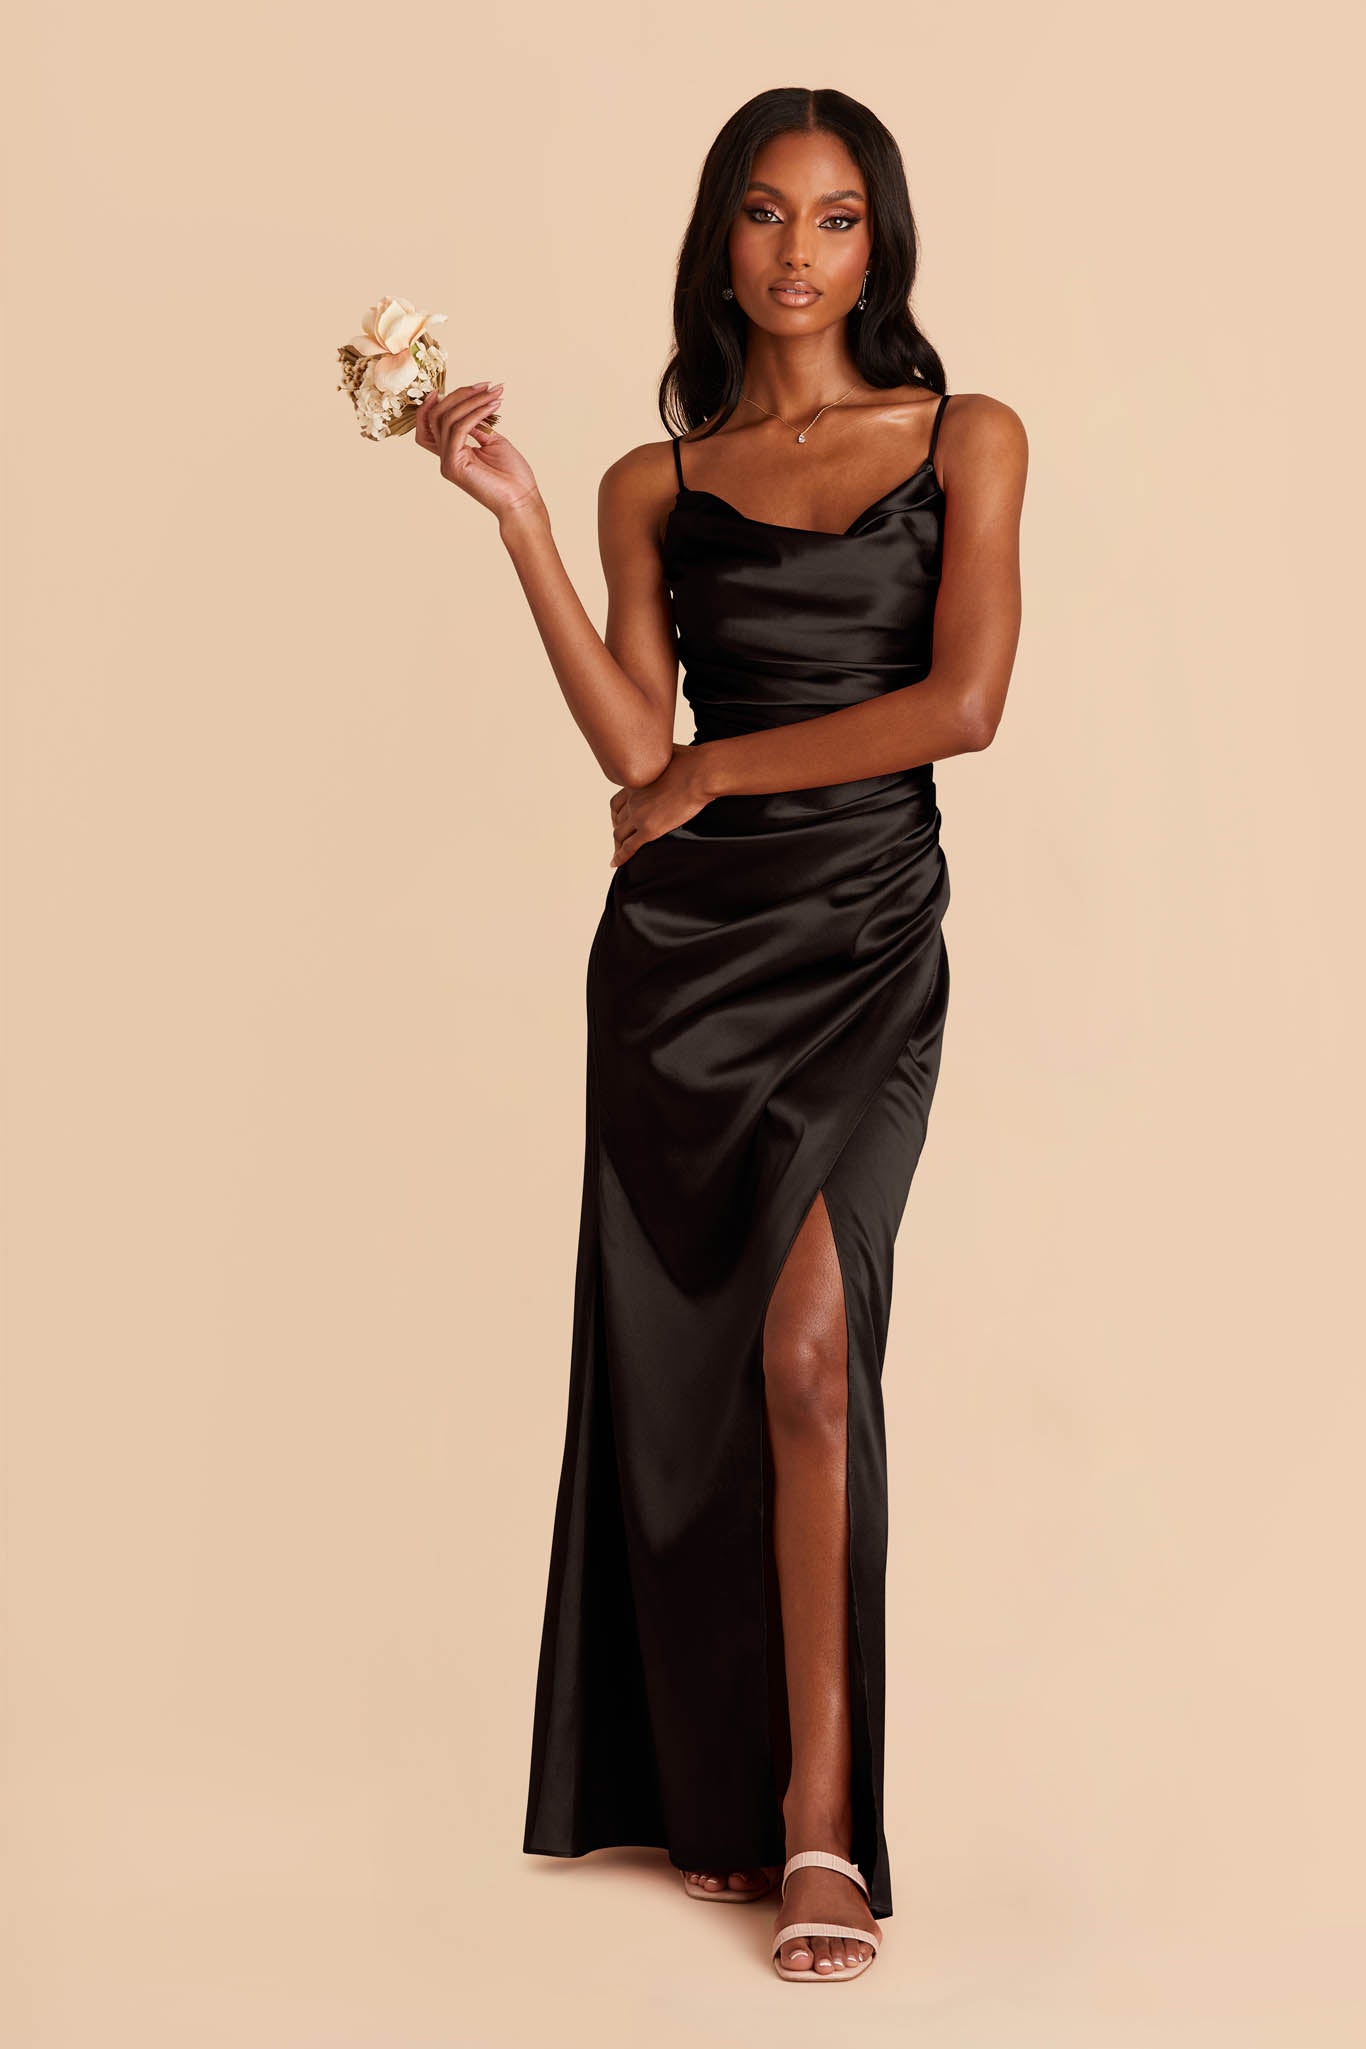 Satin dress | Lace gown styles, Latest african fashion dresses, Fashion  dresses